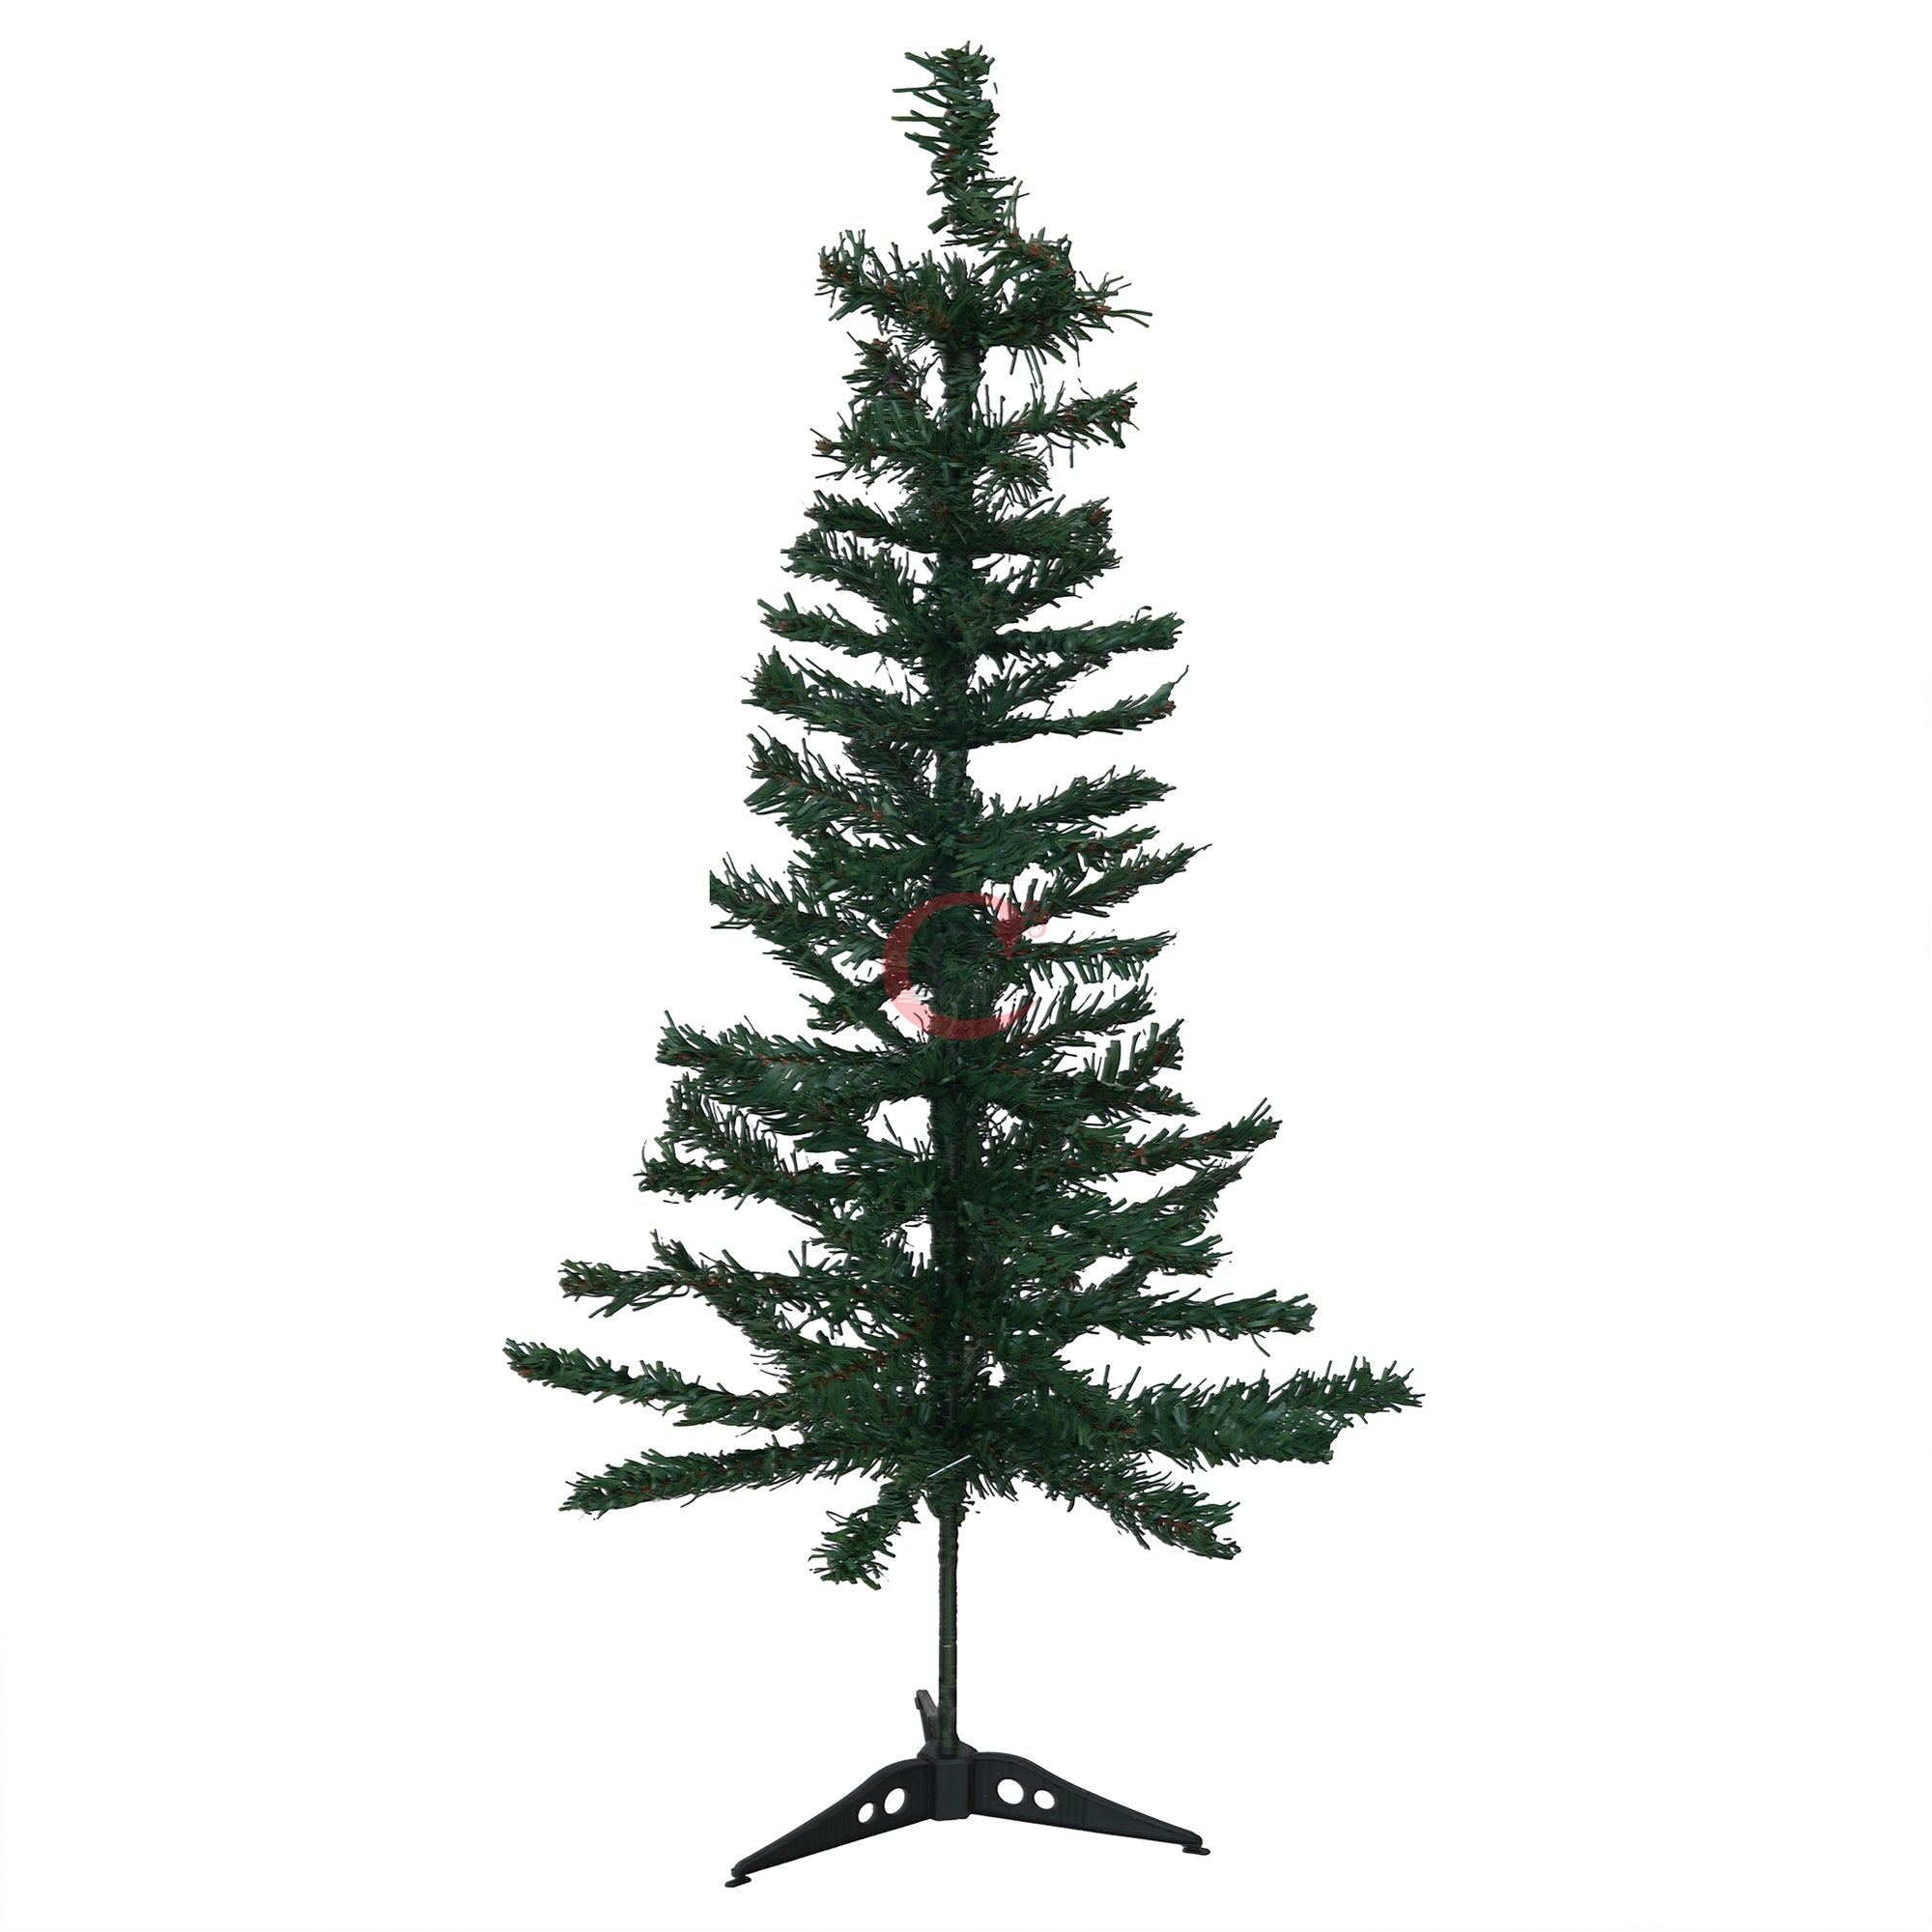 eCraftIndia 3 Feet Green Artificial Christmas Tree Xmas Pine Tree with Stand and 60 Christmas Decoration Ornaments Props - Merry Christmas Decoration Item for Home, Office, and Church 7